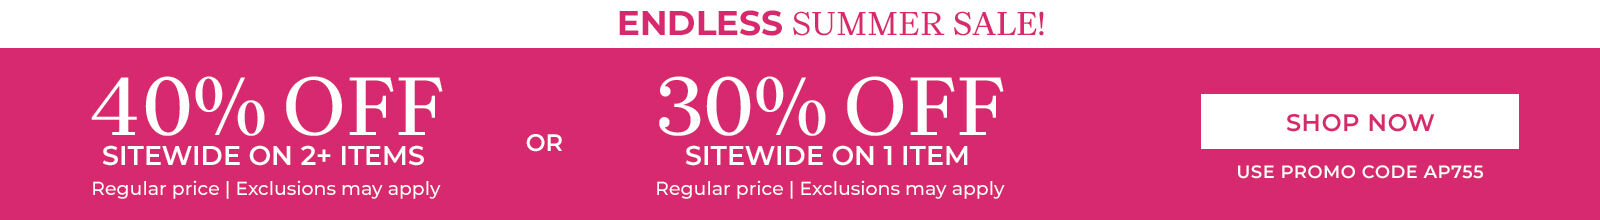 endless summer sale! 40% off sitewide on 2+ items regular price | exclusions may apply 30% off site on 1 item regular price. exclusions may apply shop now use promo code: AP755